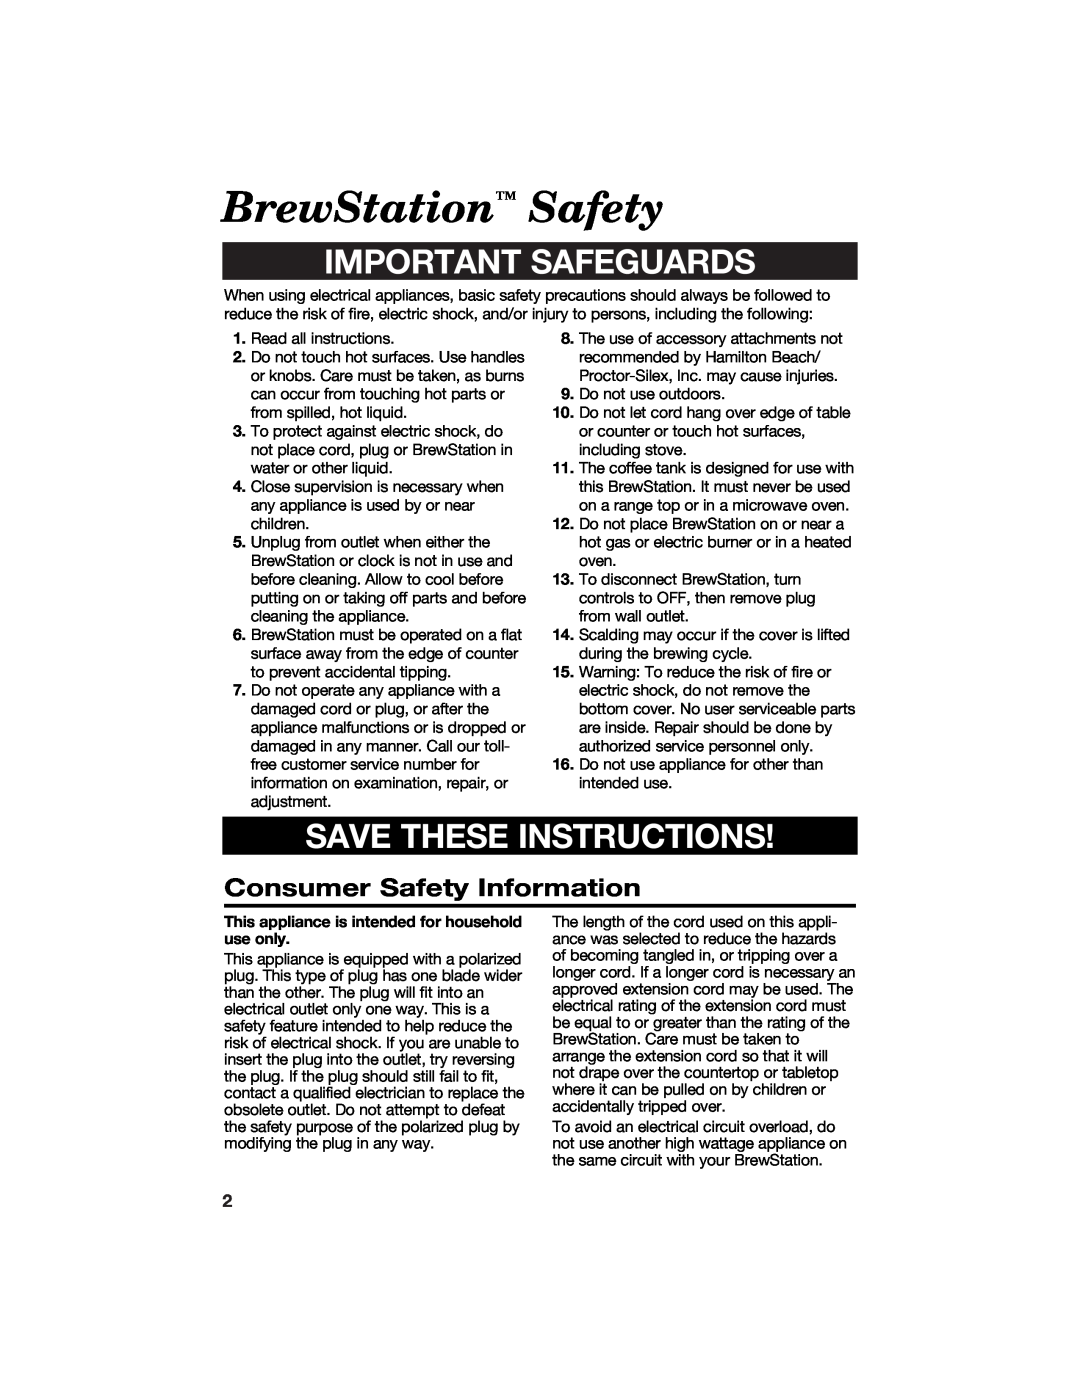 Hamilton Beach manual BrewStation Safety, Important Safeguards, Save These Instructions, Consumer Safety Information 